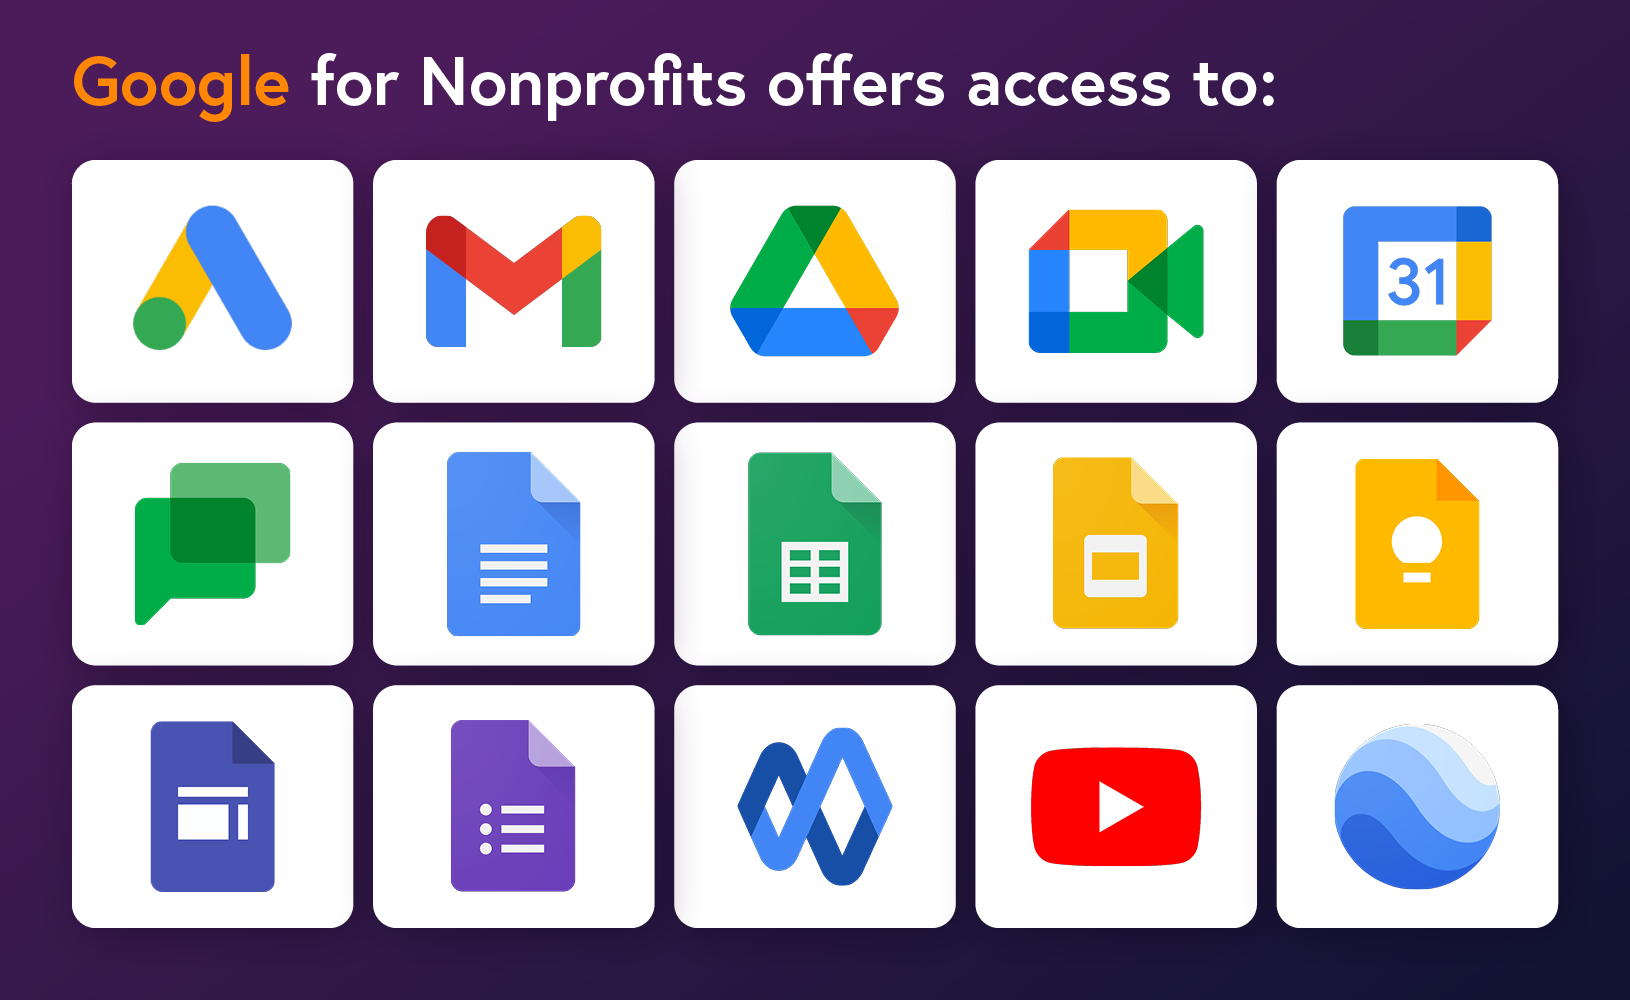 Google for Nonprofits offers free access to these tools in addition to Google Ad Grants